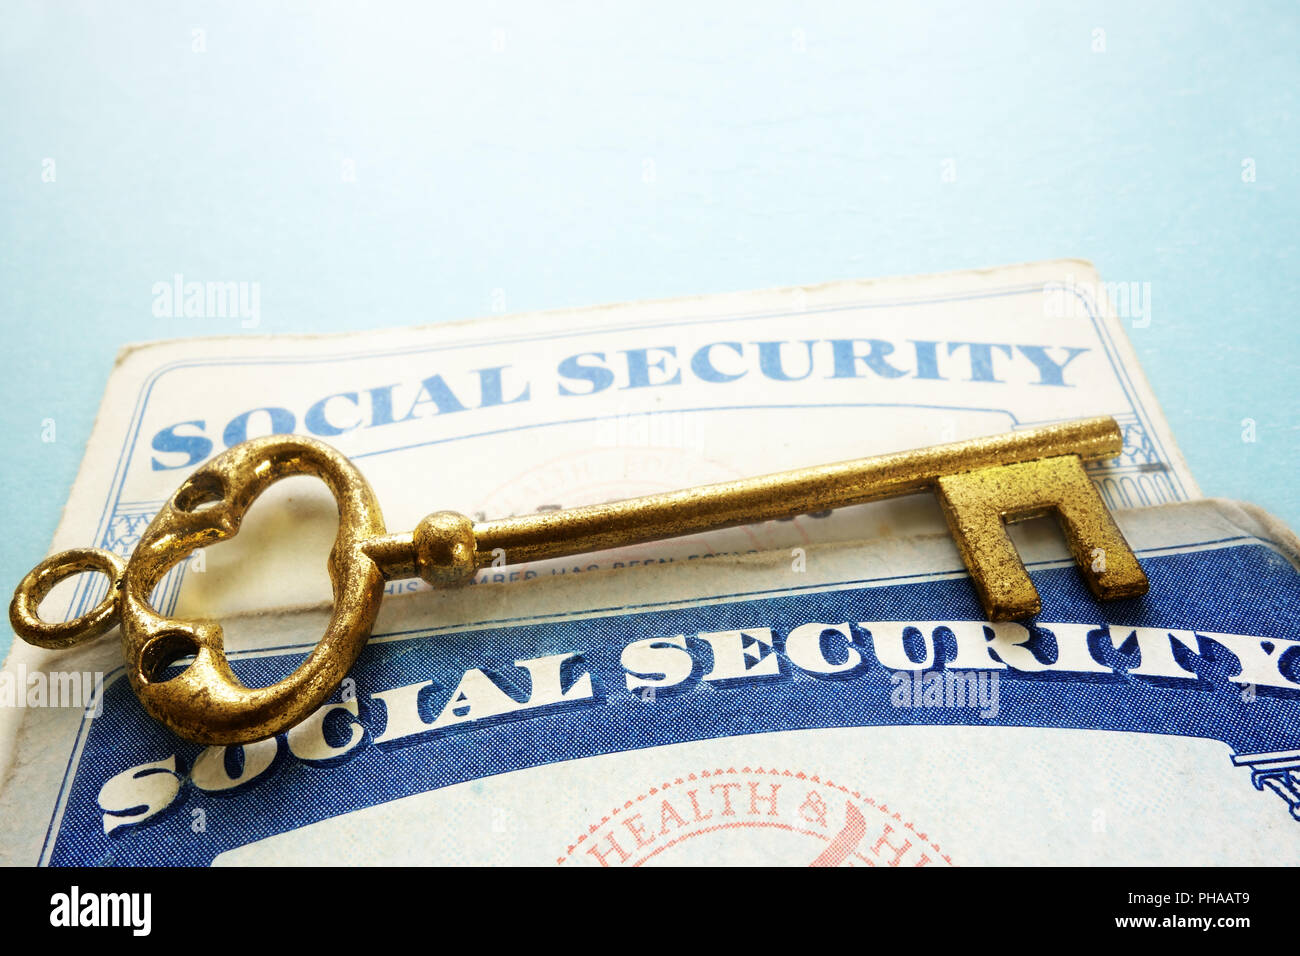 Social Security cards and key Stock Photo